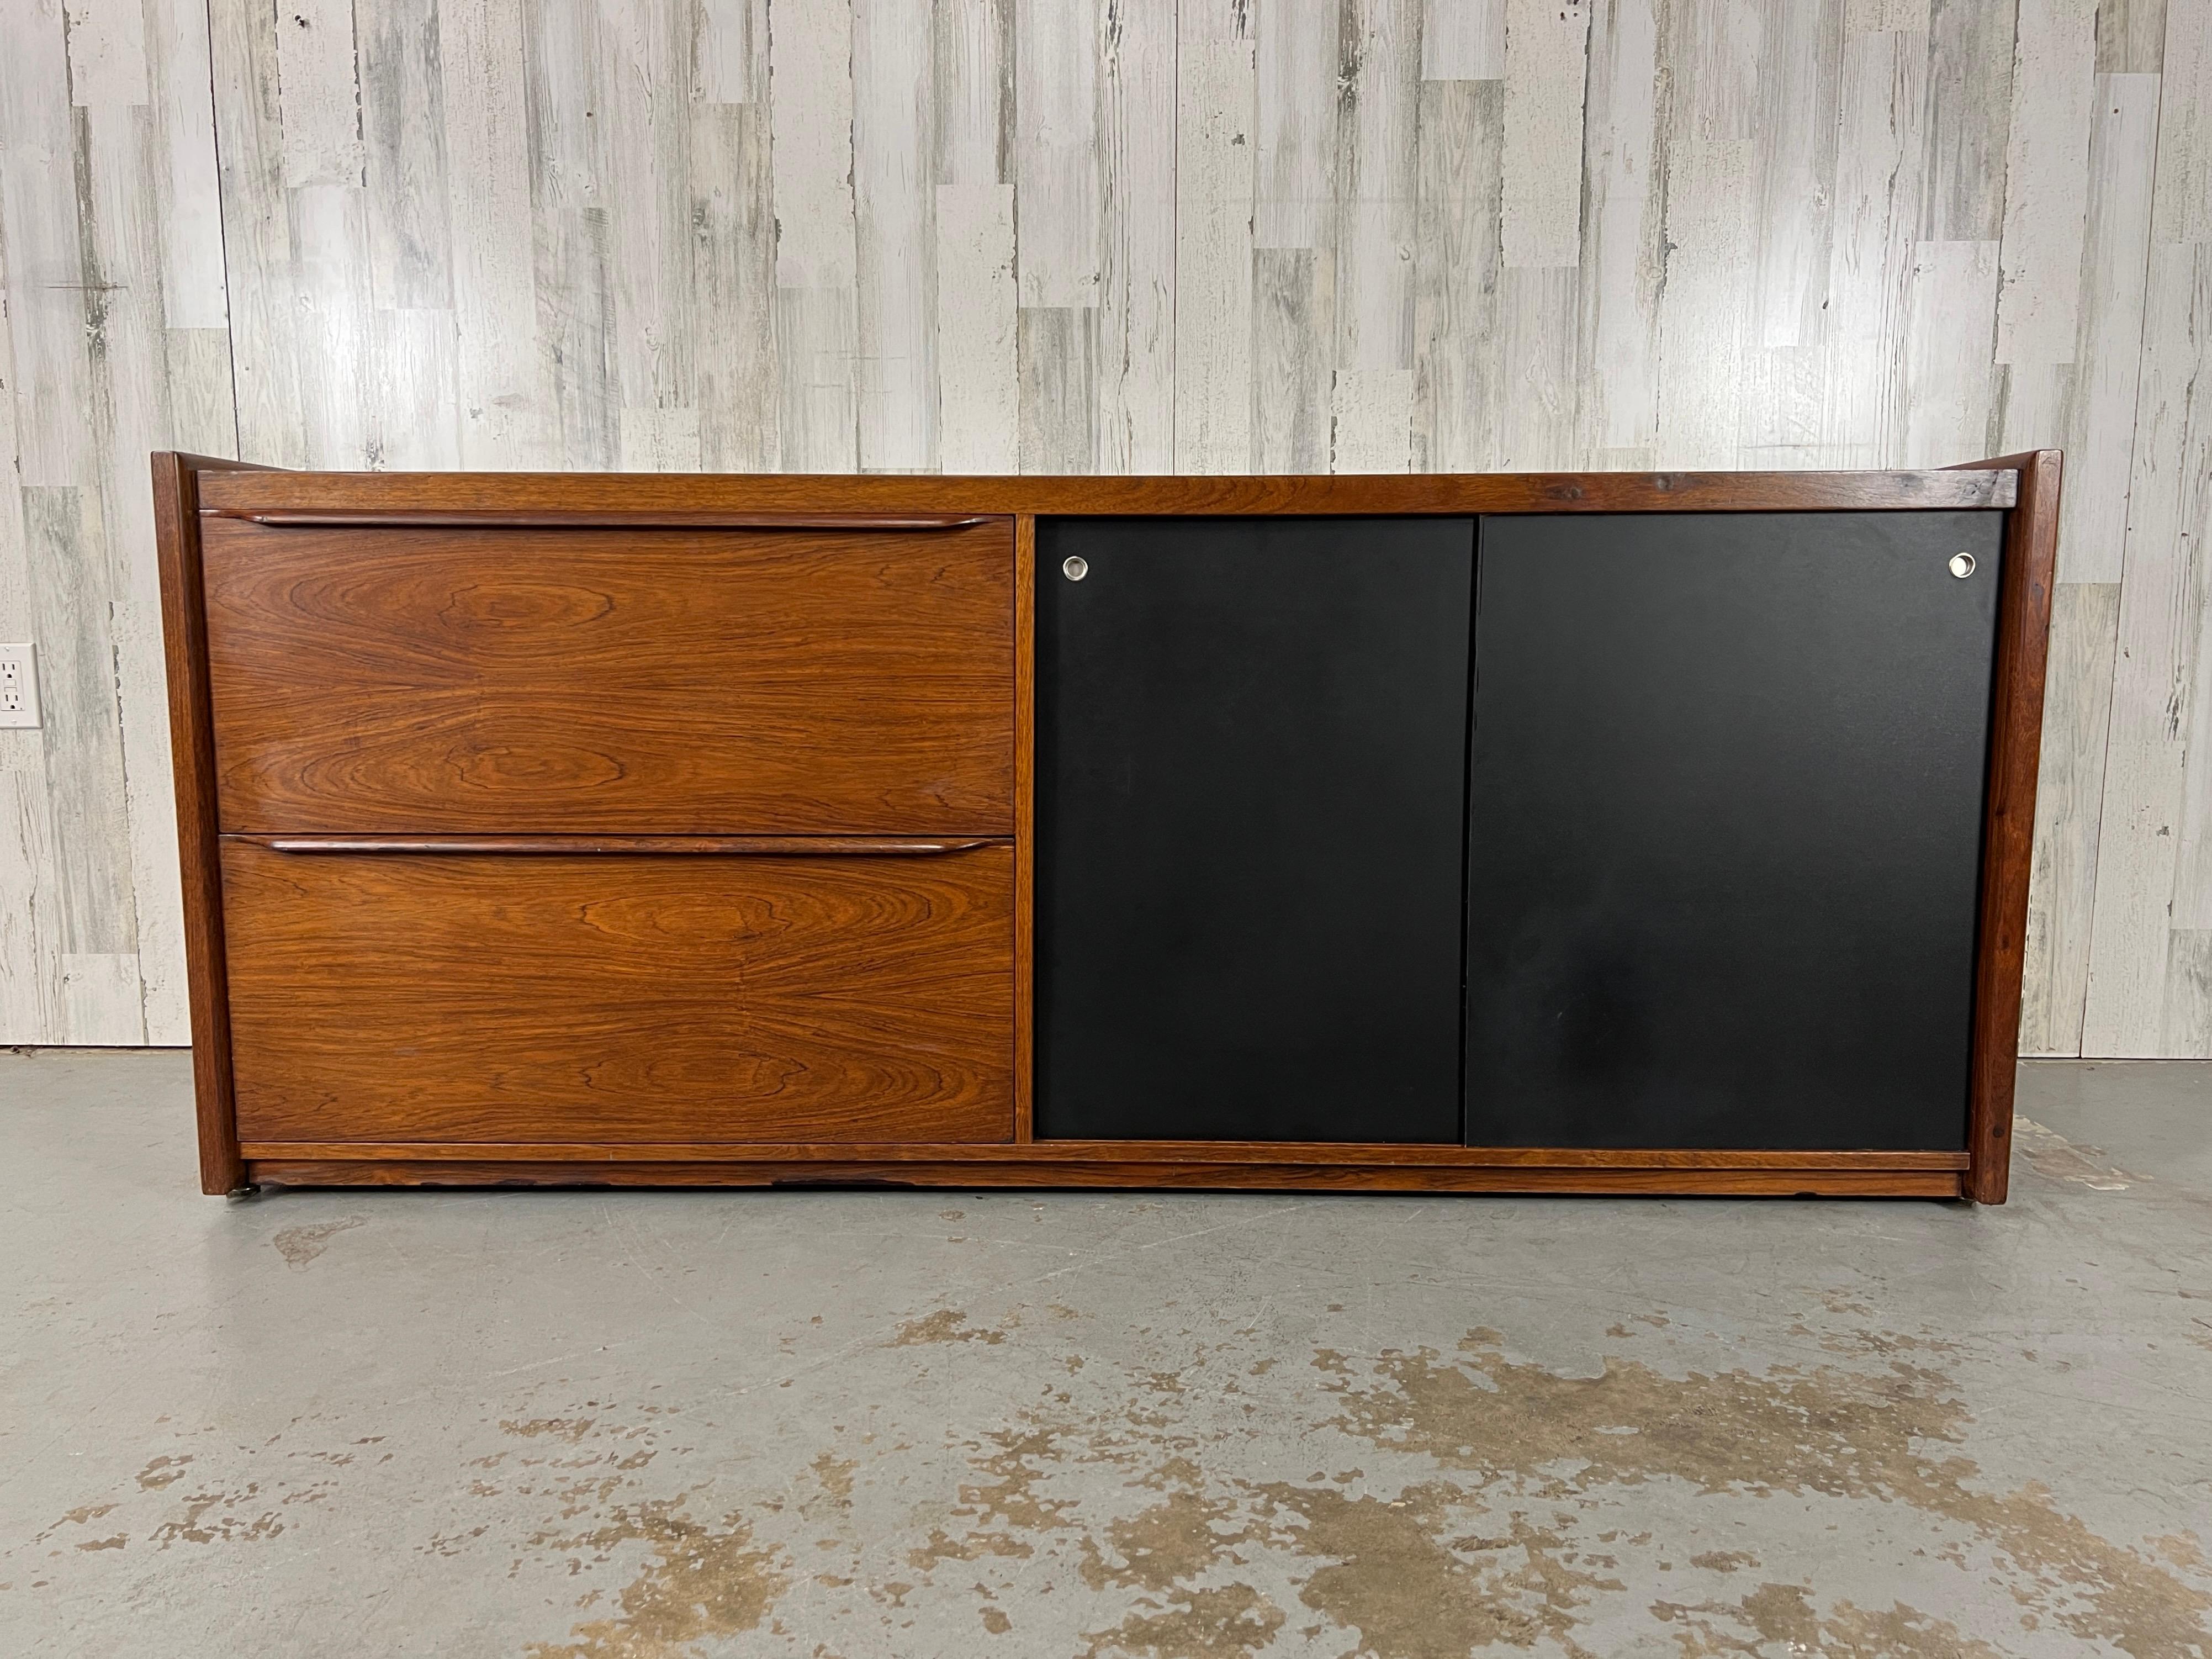 Classic figural rosewood Danish Modern credenza with black masonite sliding doors.
There is a shelf behind the sliding doors next to two file drawers for origination.
The back is also finished, please see pictures.
Original finish.